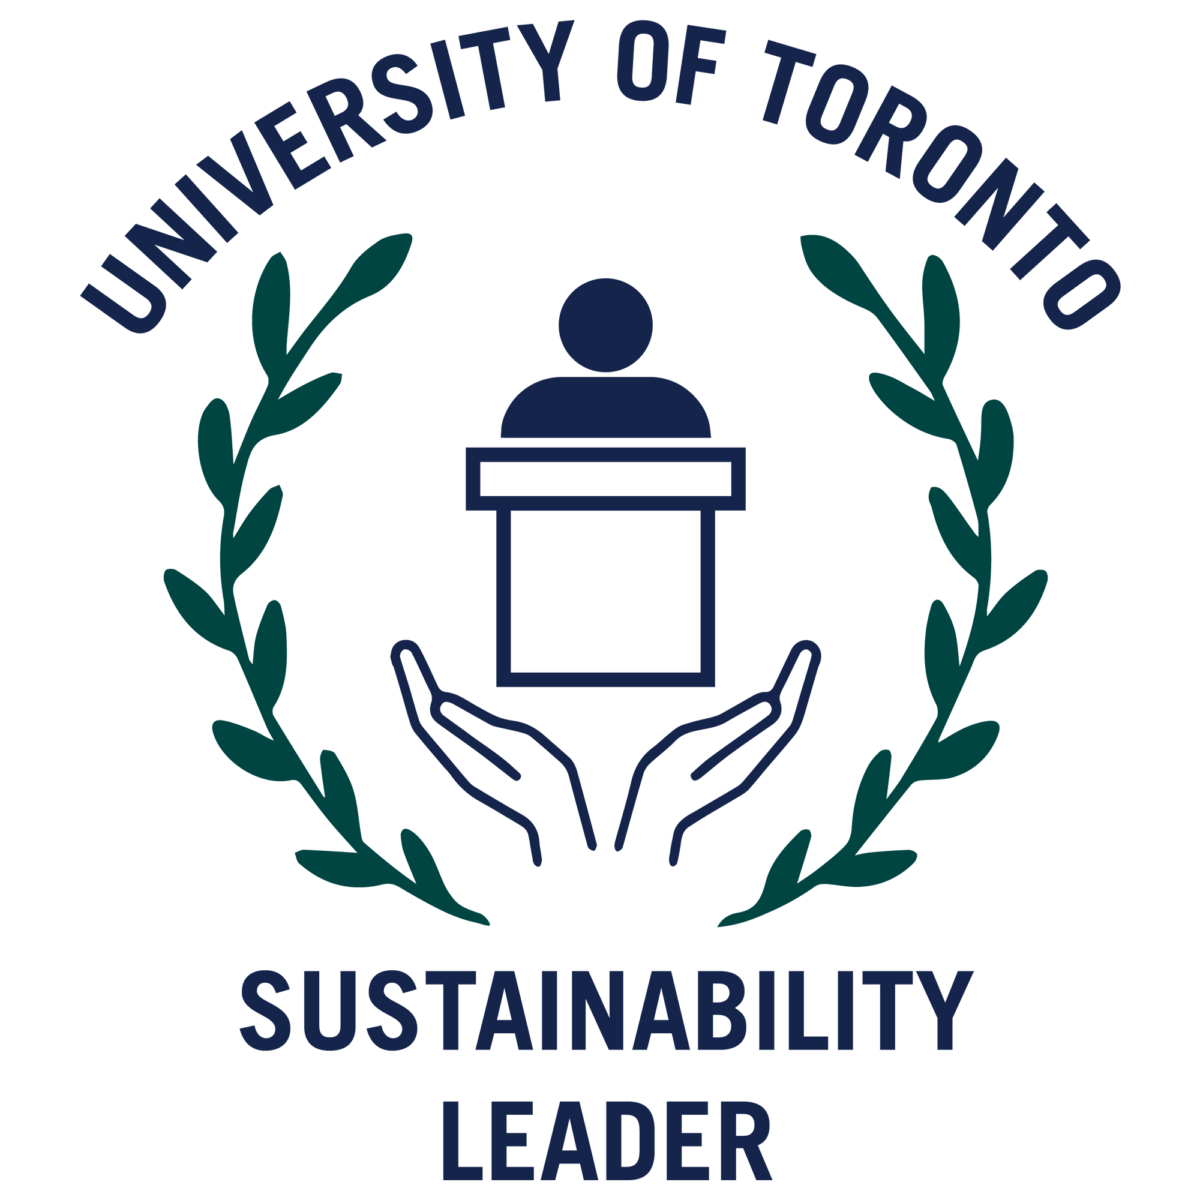 Sustainability Leader logo, showing two hands under a person at a podium